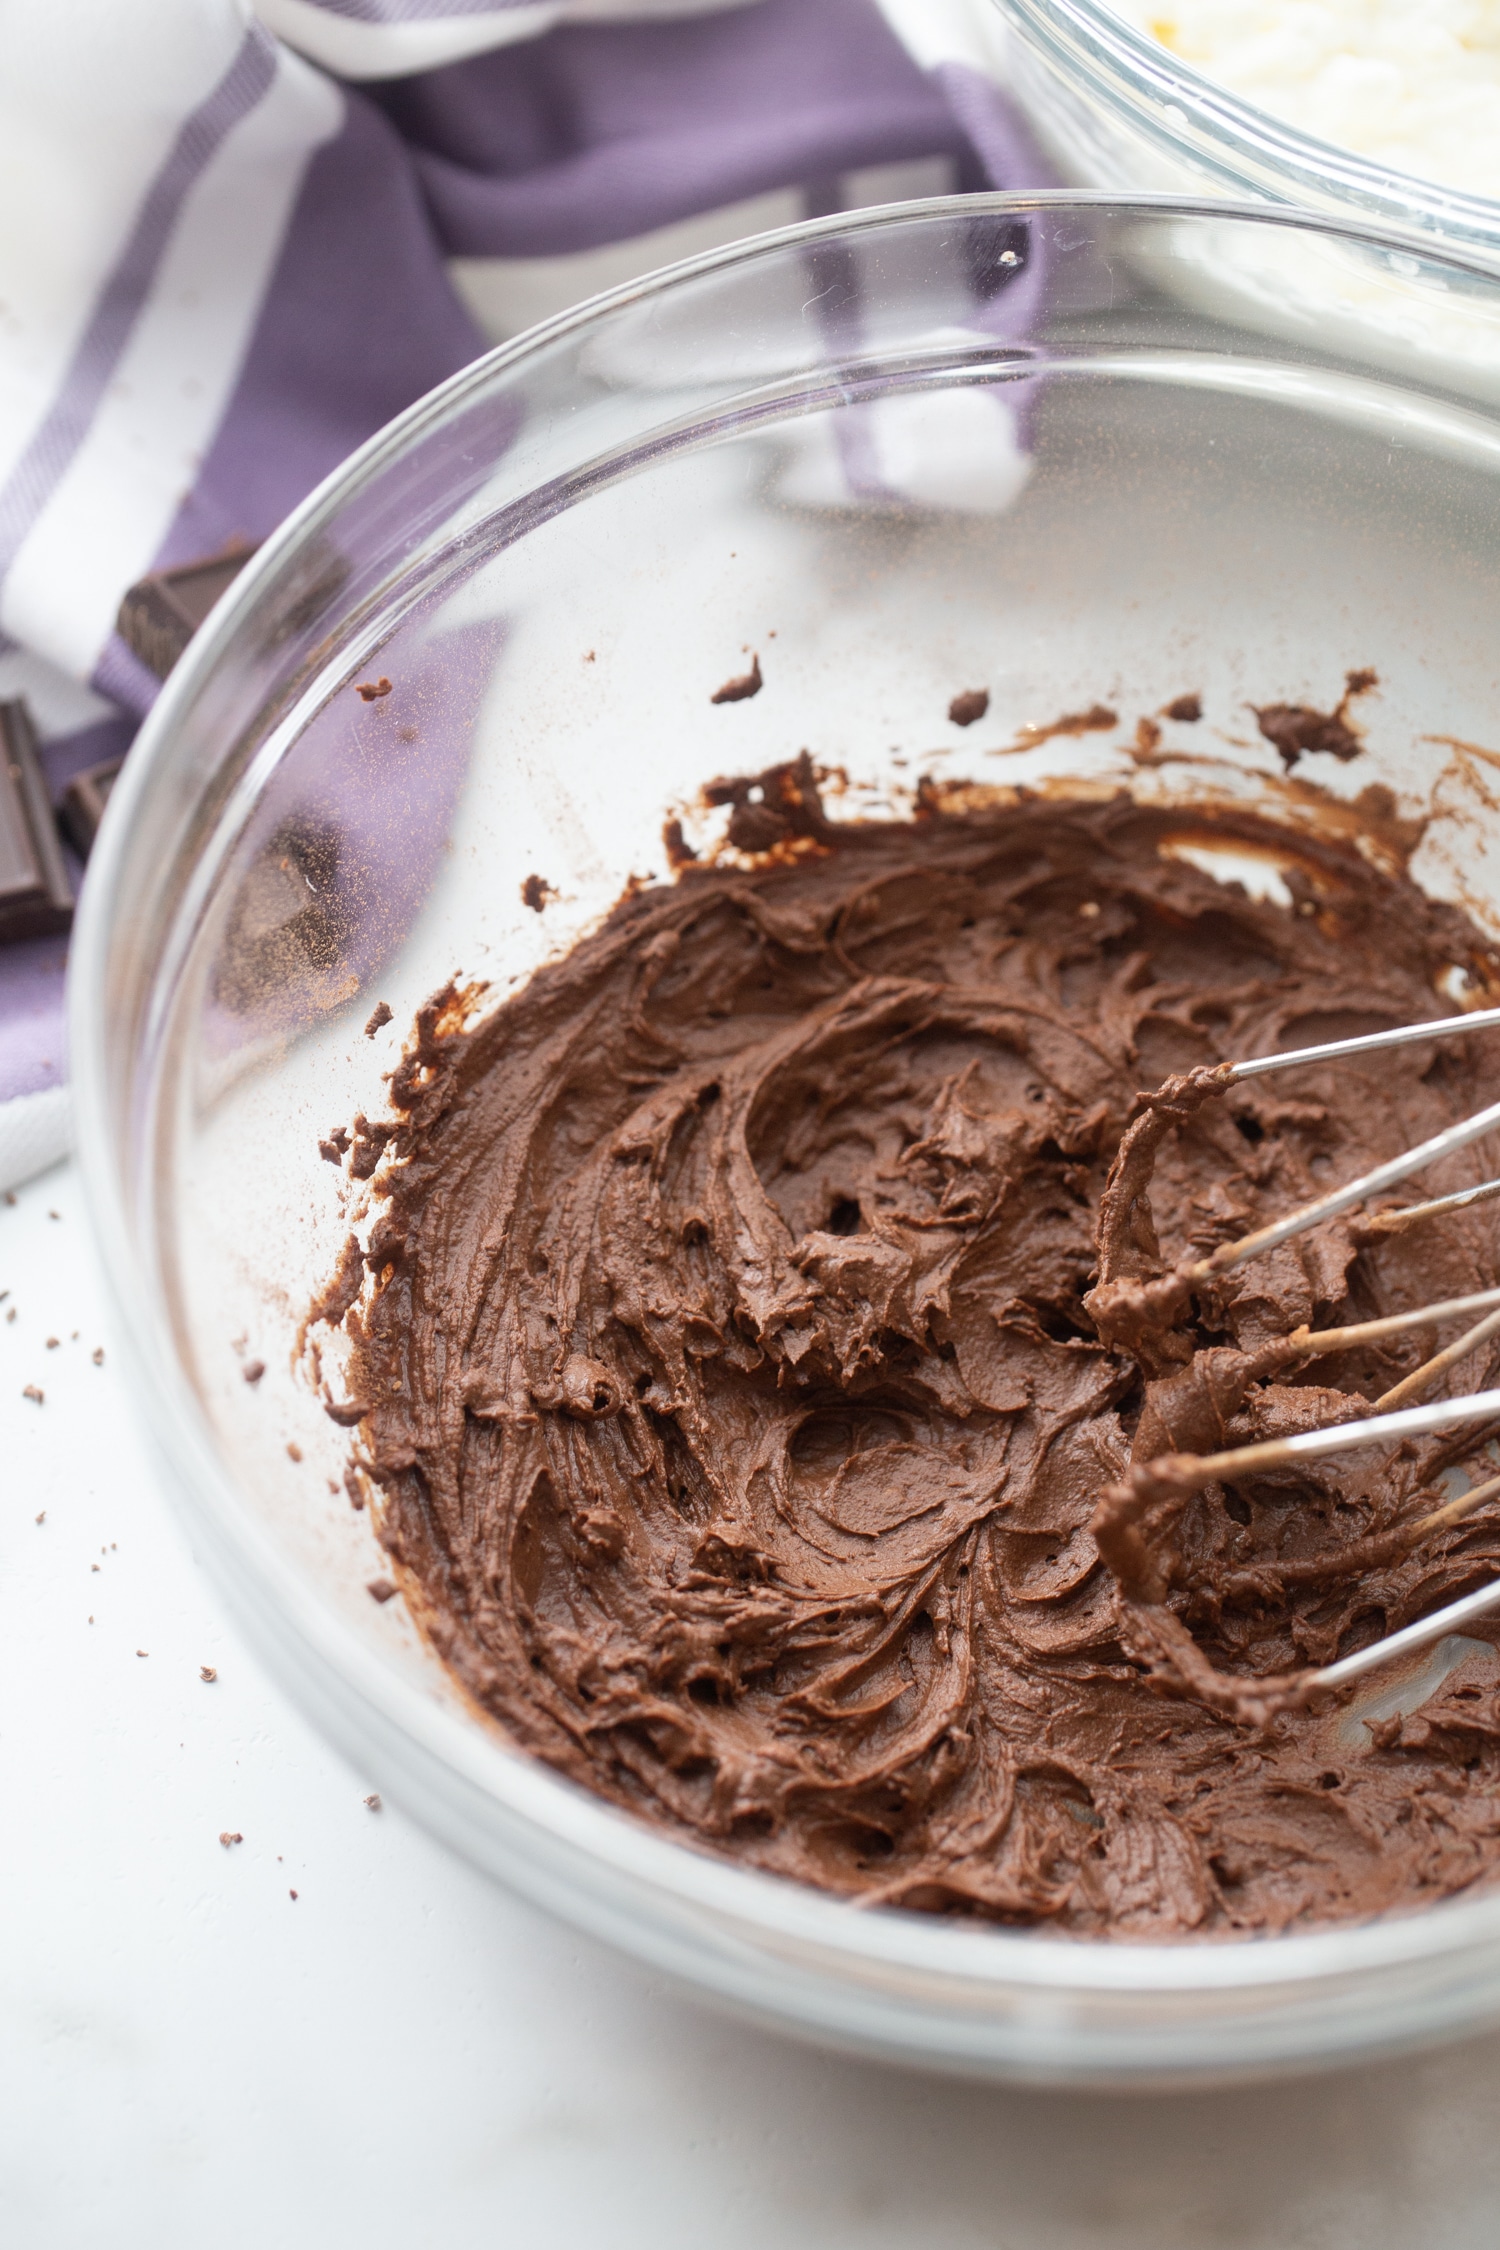 Chocolate Mousse mixture without the heavy whipping cream in a bowl.